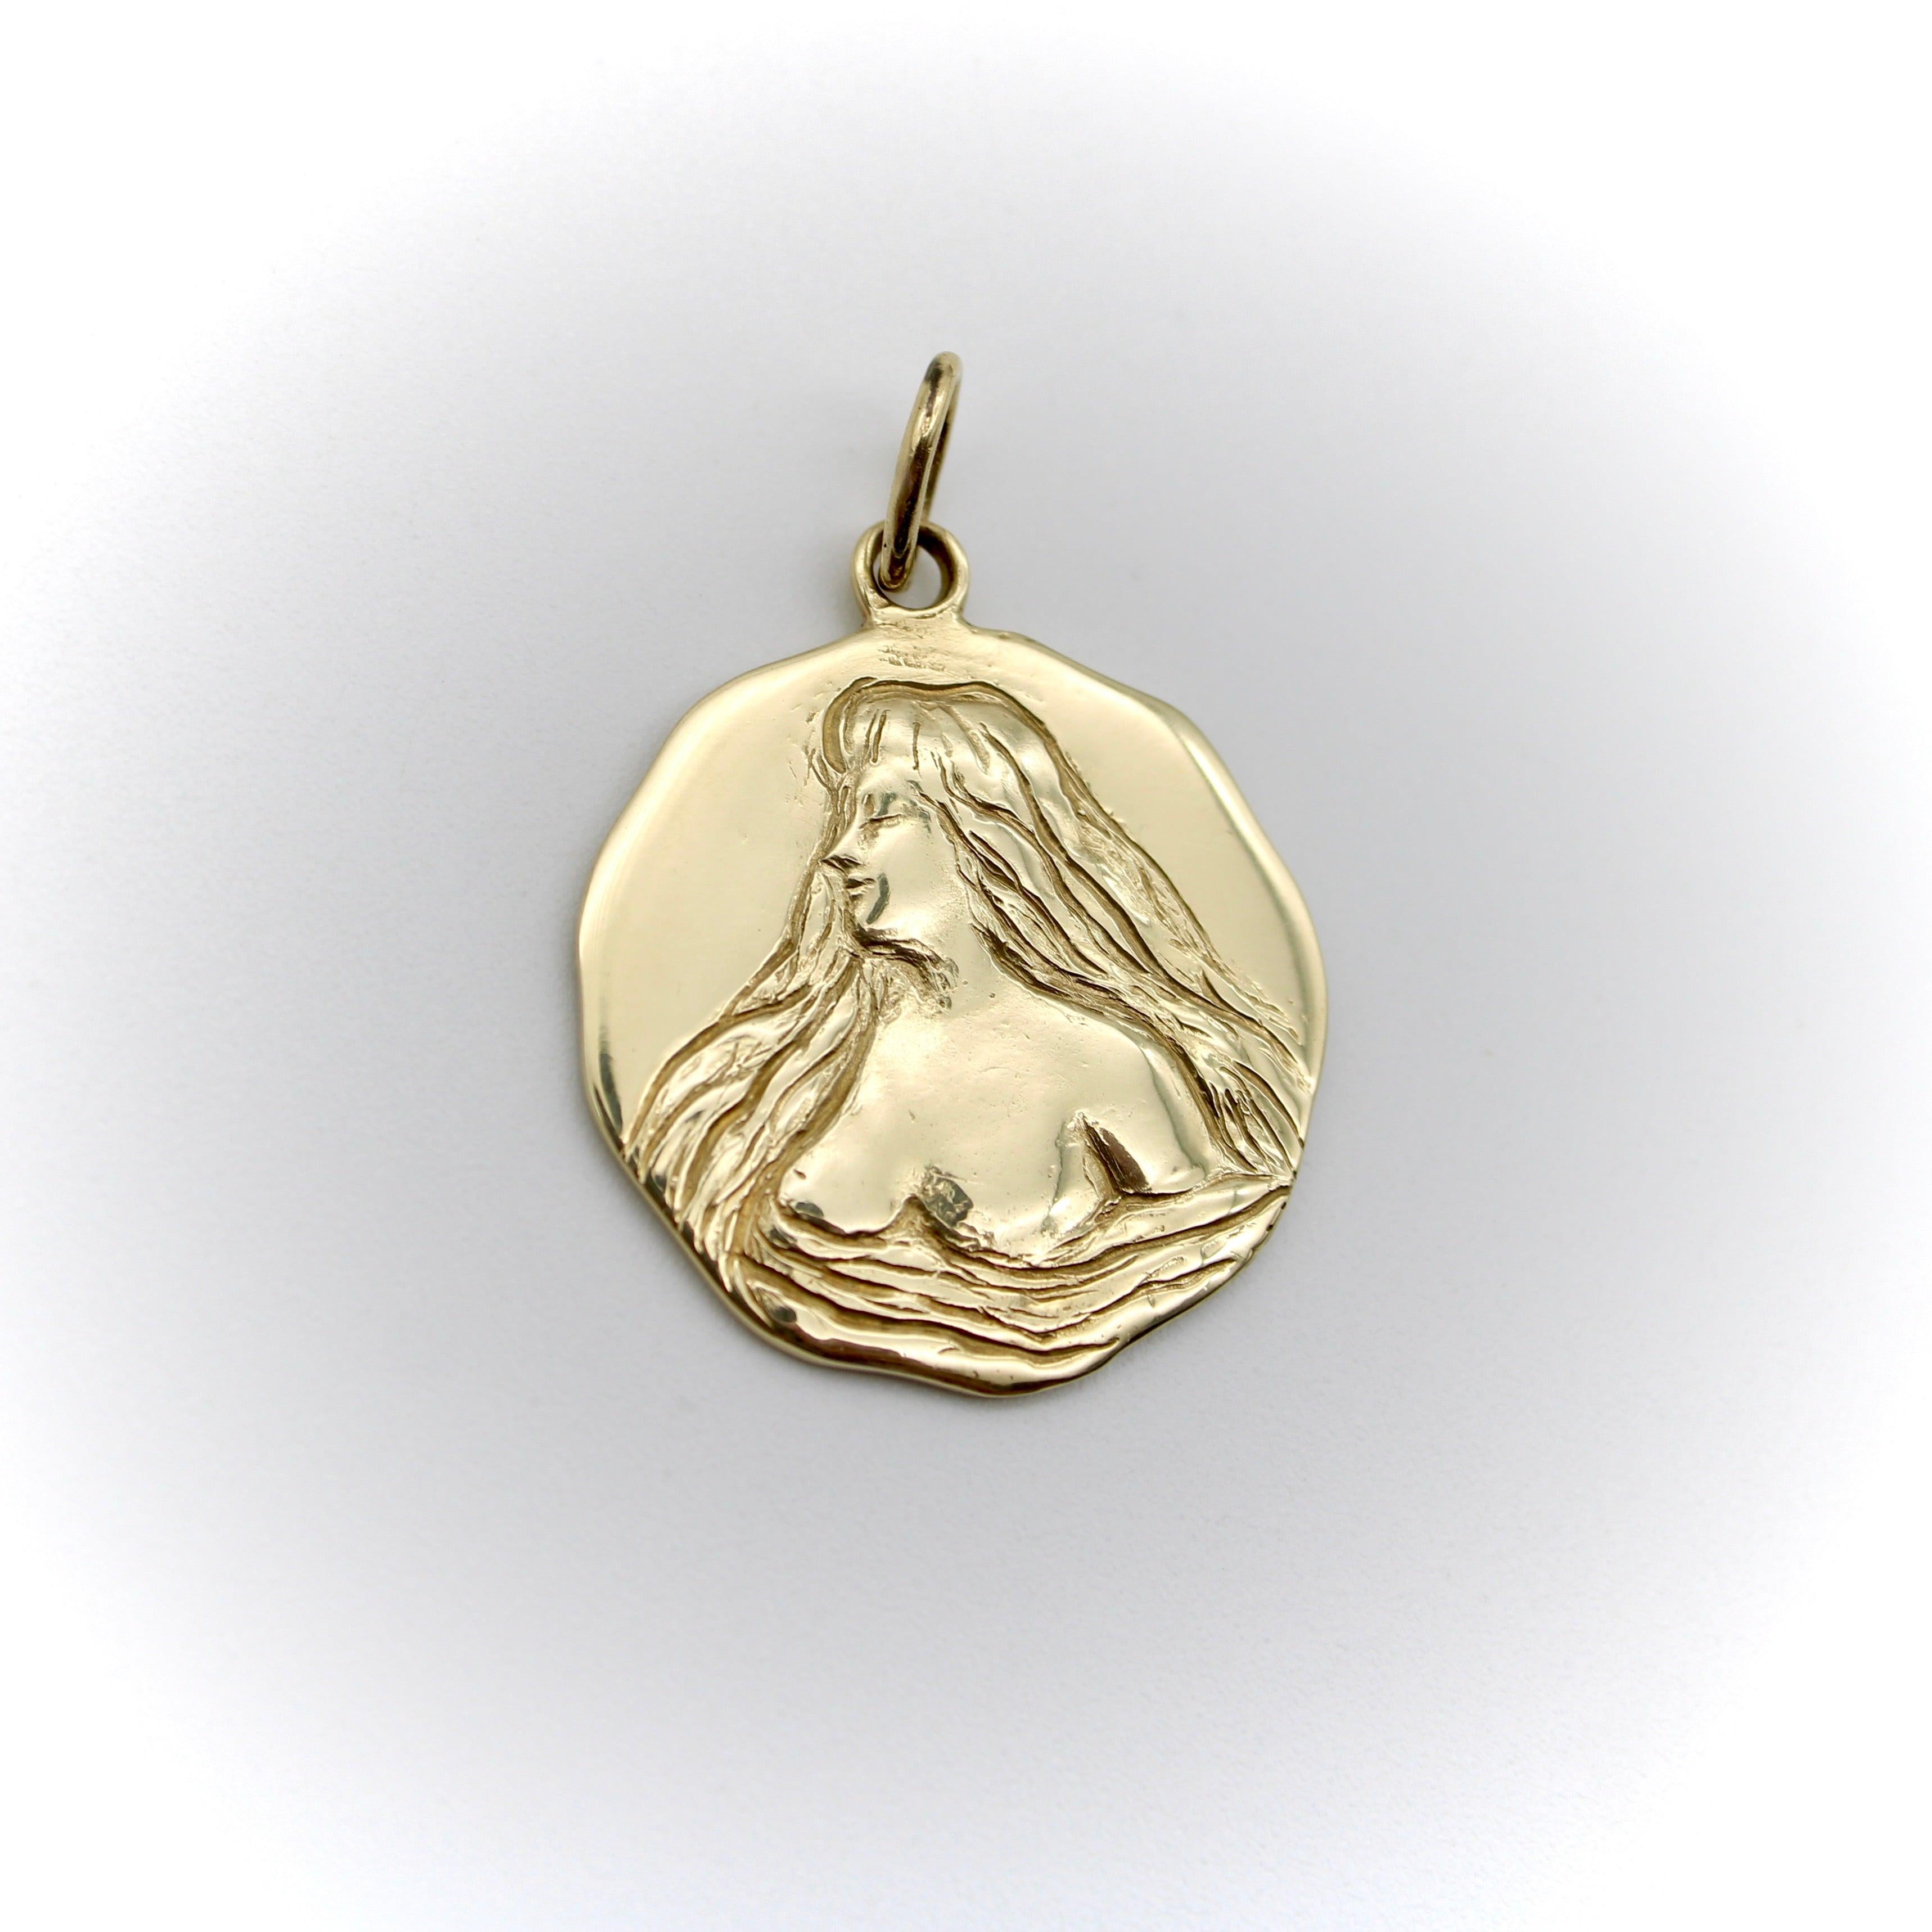 The image on this 14k gold medallion was originally taken from an Art Nouveau locket. Kirsten’s Corner created a mold using the face of the locket, and then hand-carved details to emphasize and add depth to the original design. The maiden is